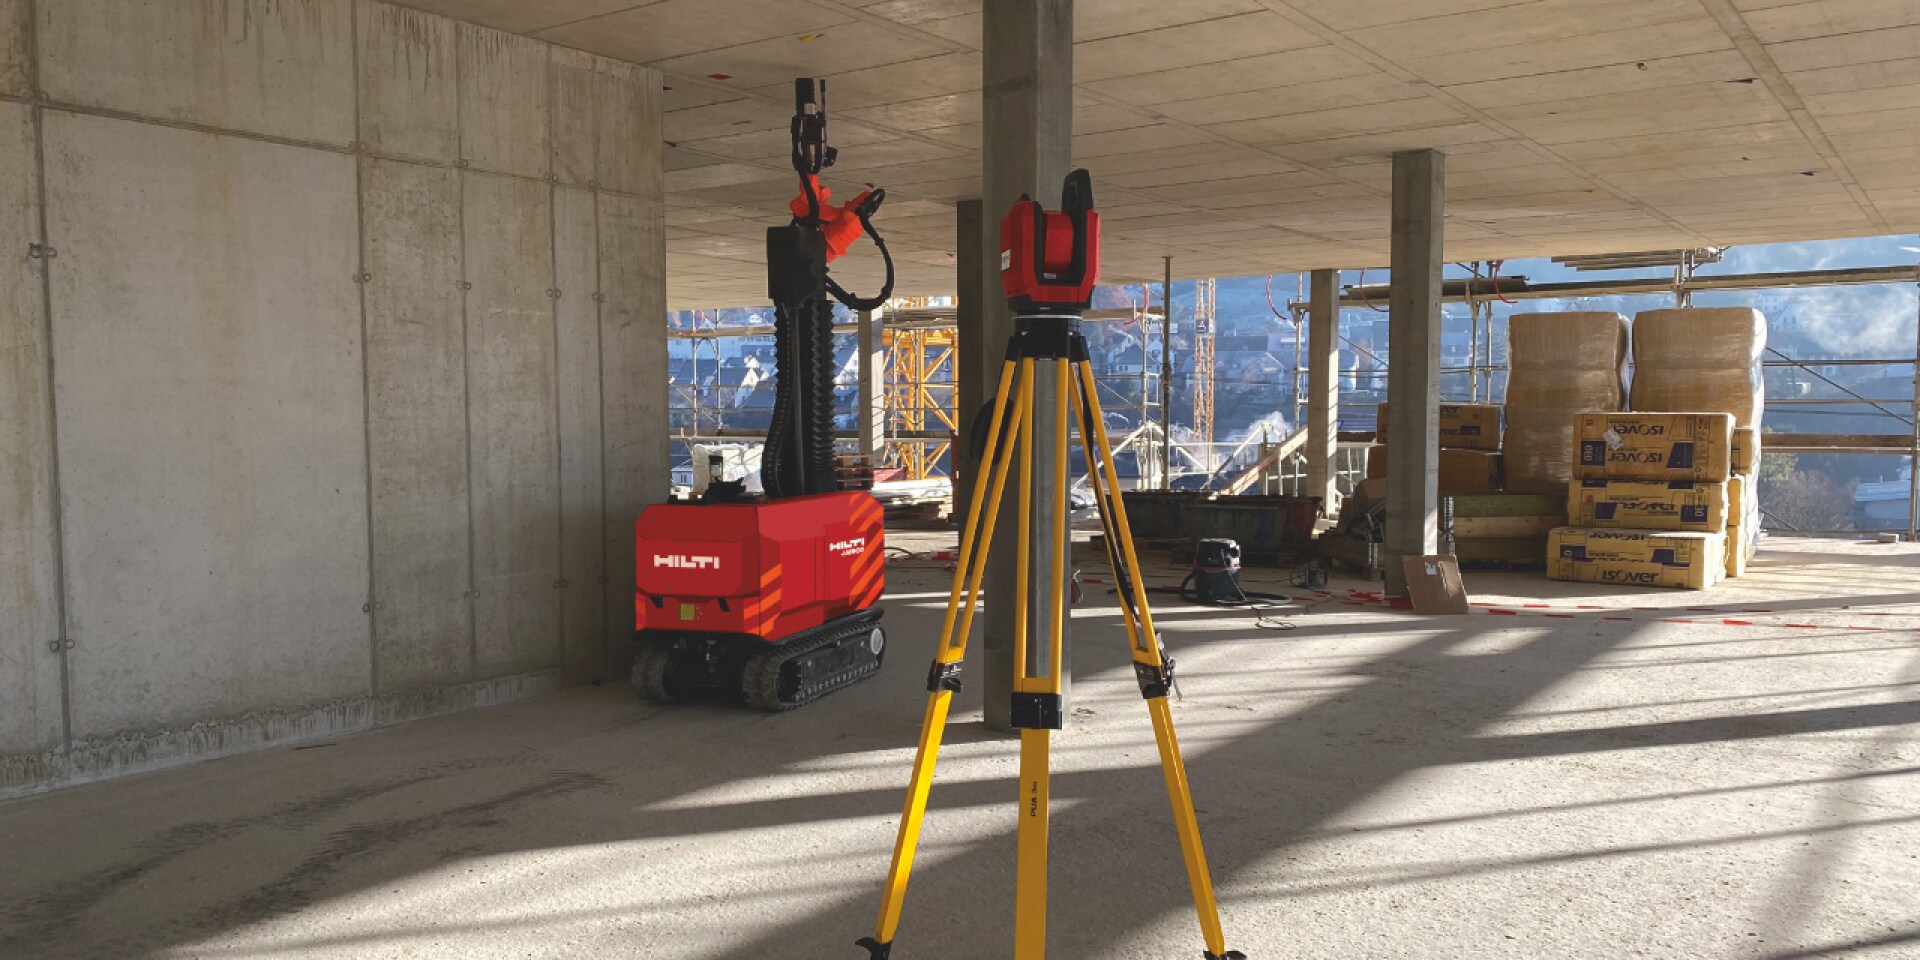 The Jaibot helps helps to relieve construction employees of strenuous and repetitive tasks like overhead drilling.